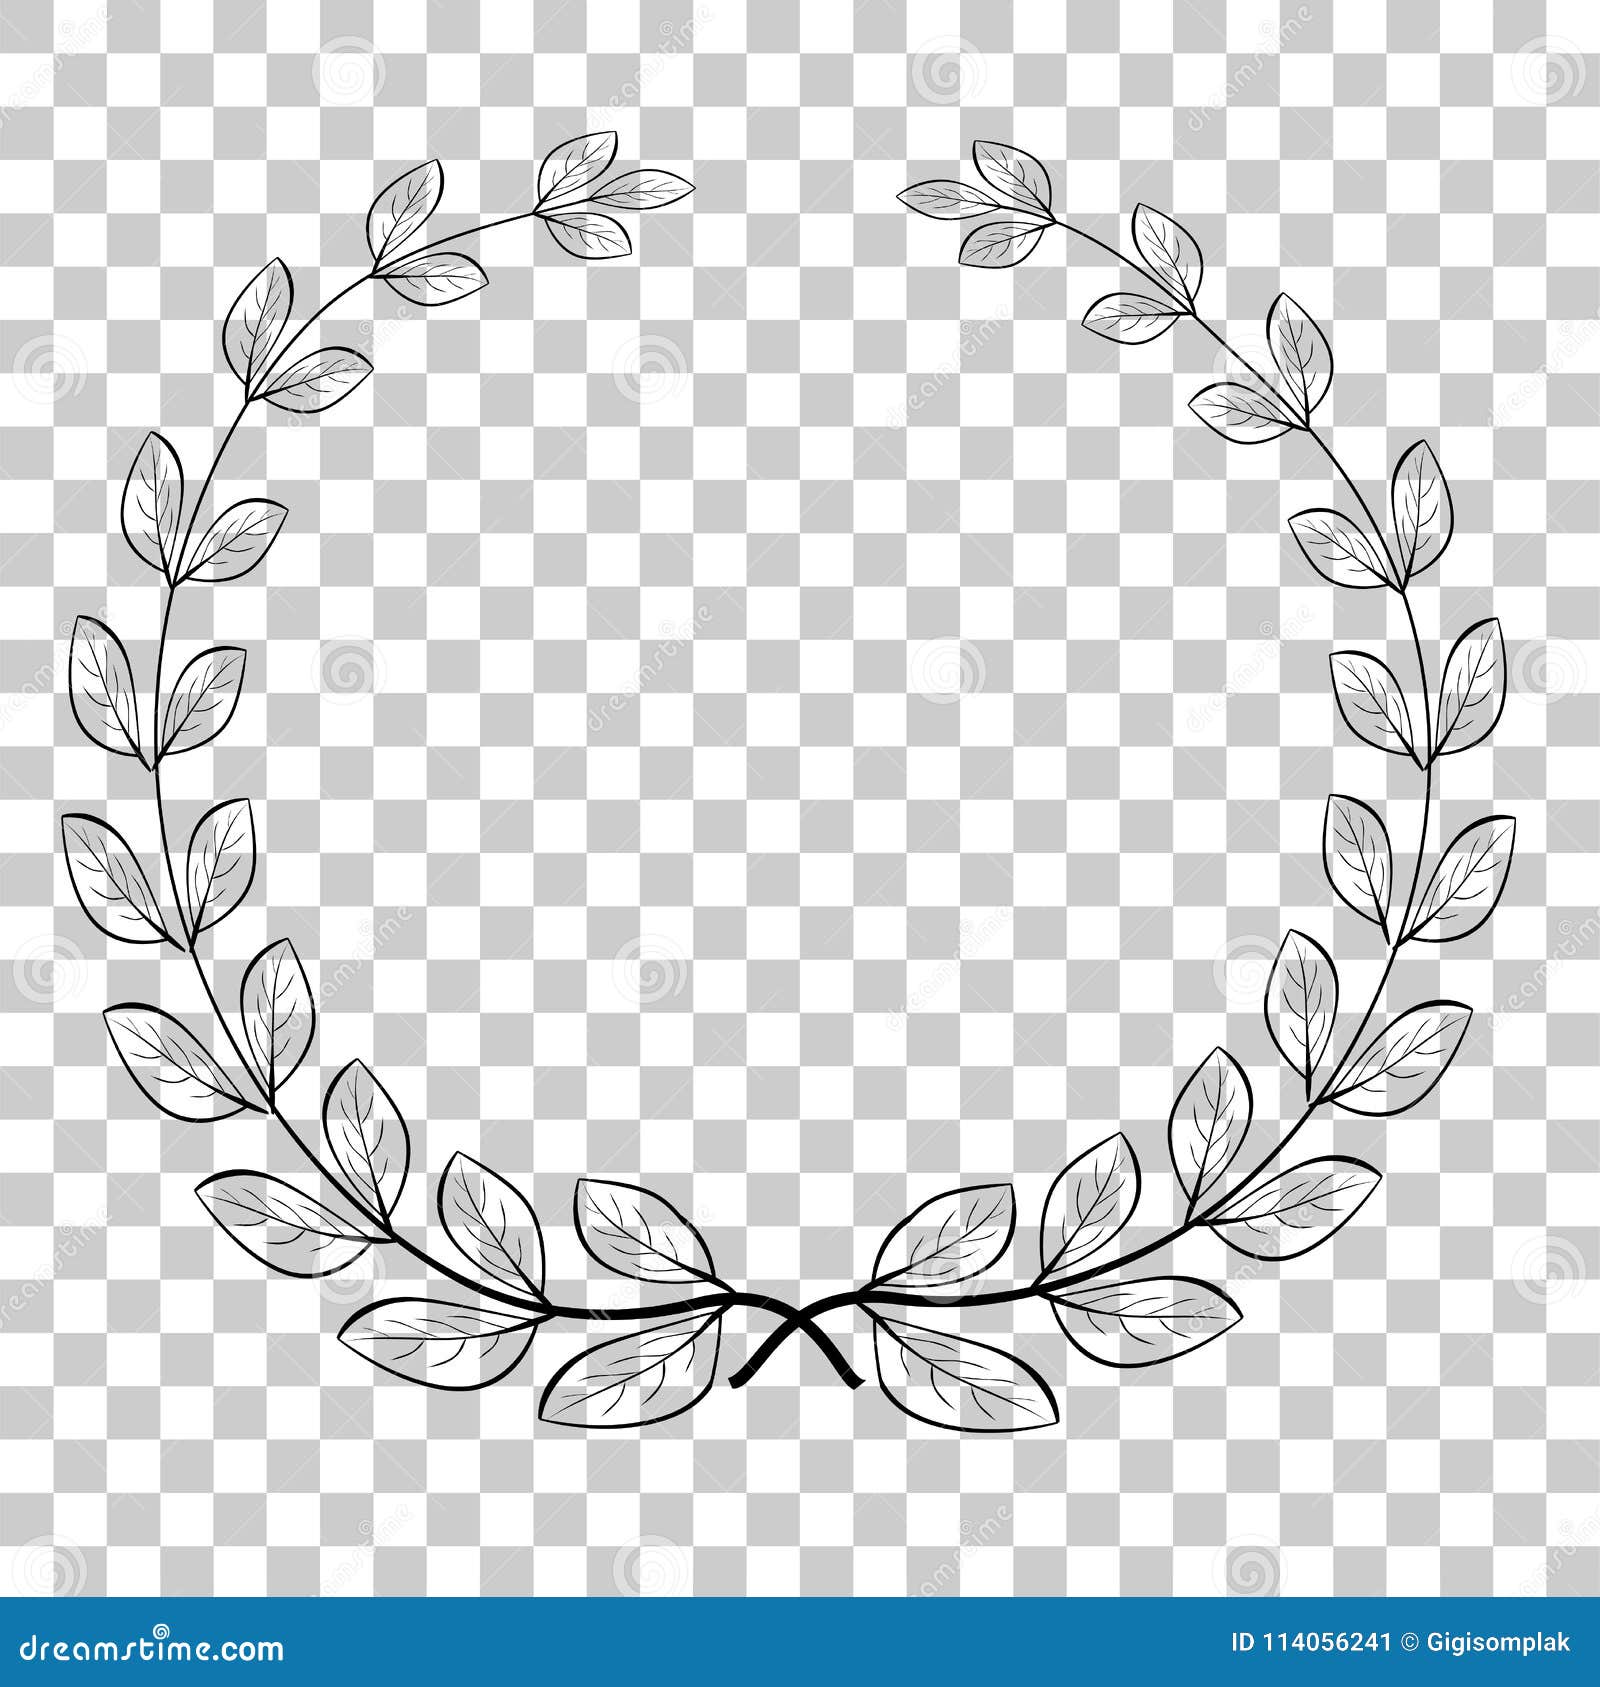 Doodle Circle Laurel Wreath Vector Icon For Your Title Border At